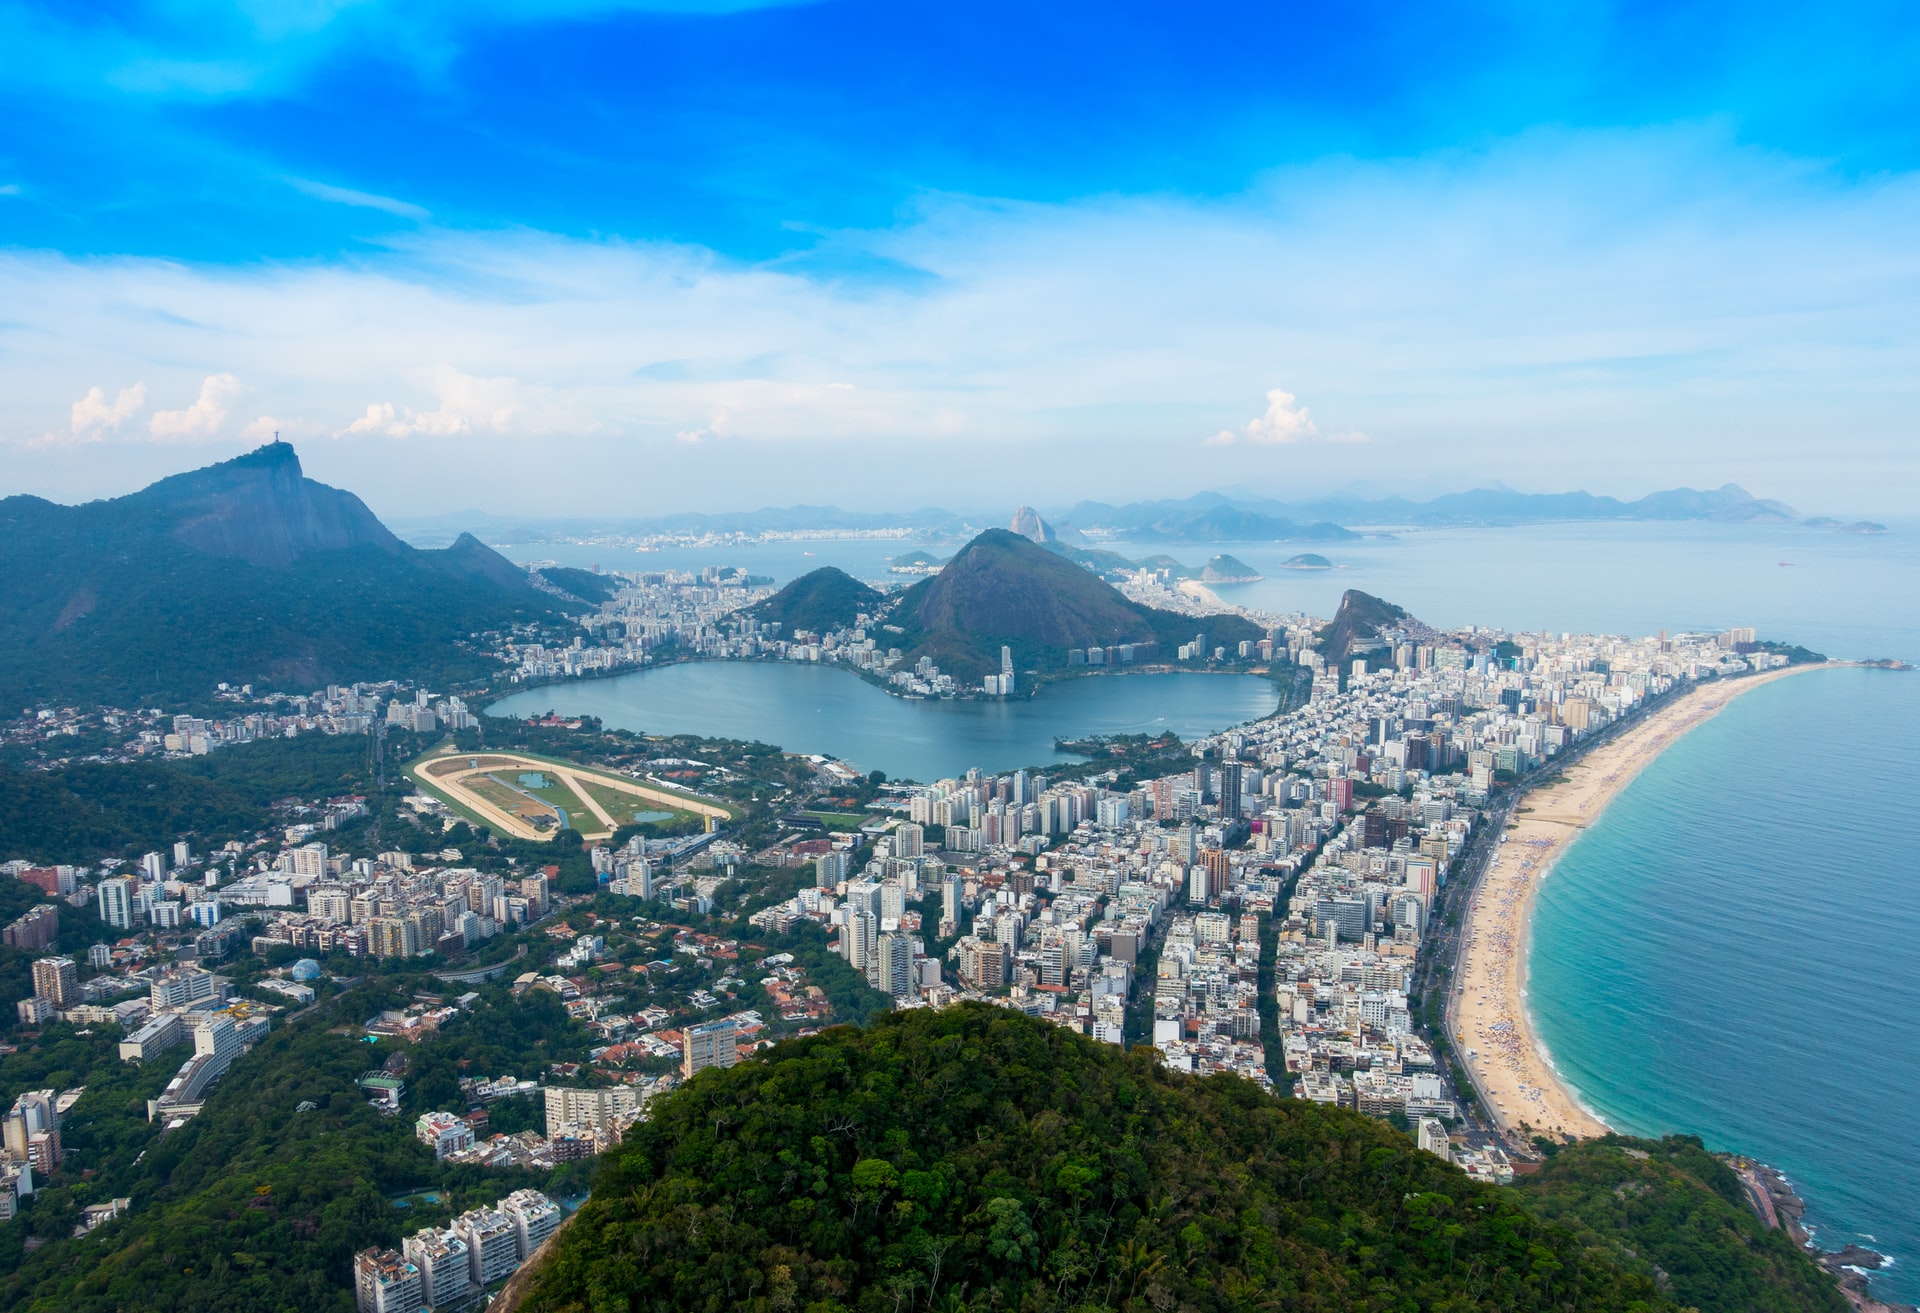 Rio de Janeiro,10 best countries to visit in south america